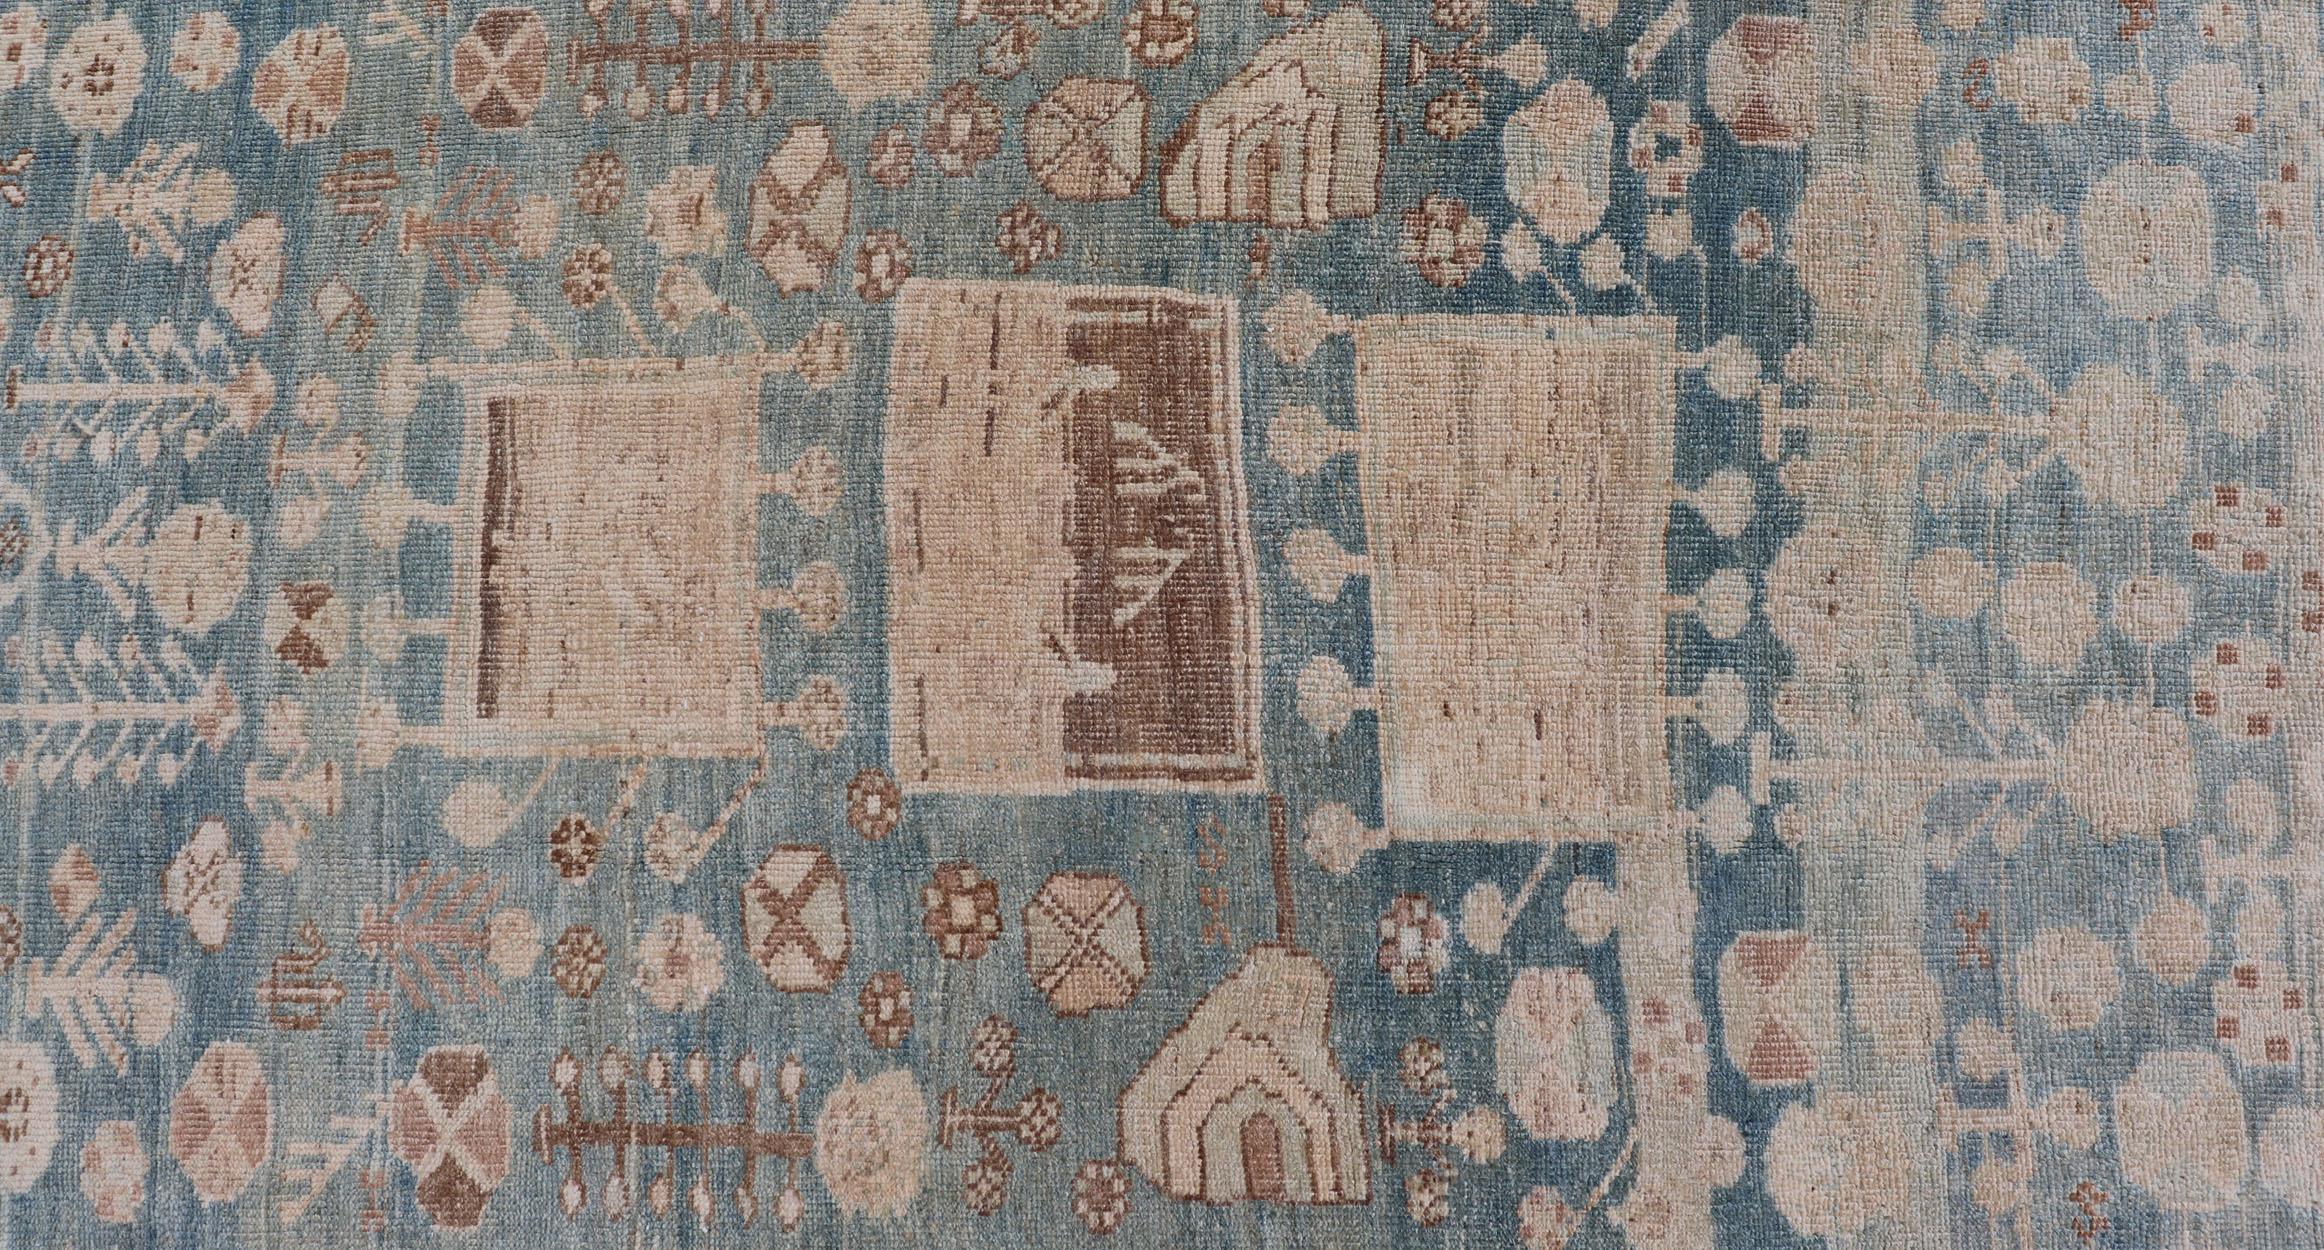 Antique Kurdish rug with tribal geometric medallions in soft blue, cream, light blue, medium blue with hint of teal, brown, tape, and cream in the border. 
Keivan Woven Arts / rug EMB-9599-P13503, country of origin / type: Iran / Kurdish, circa